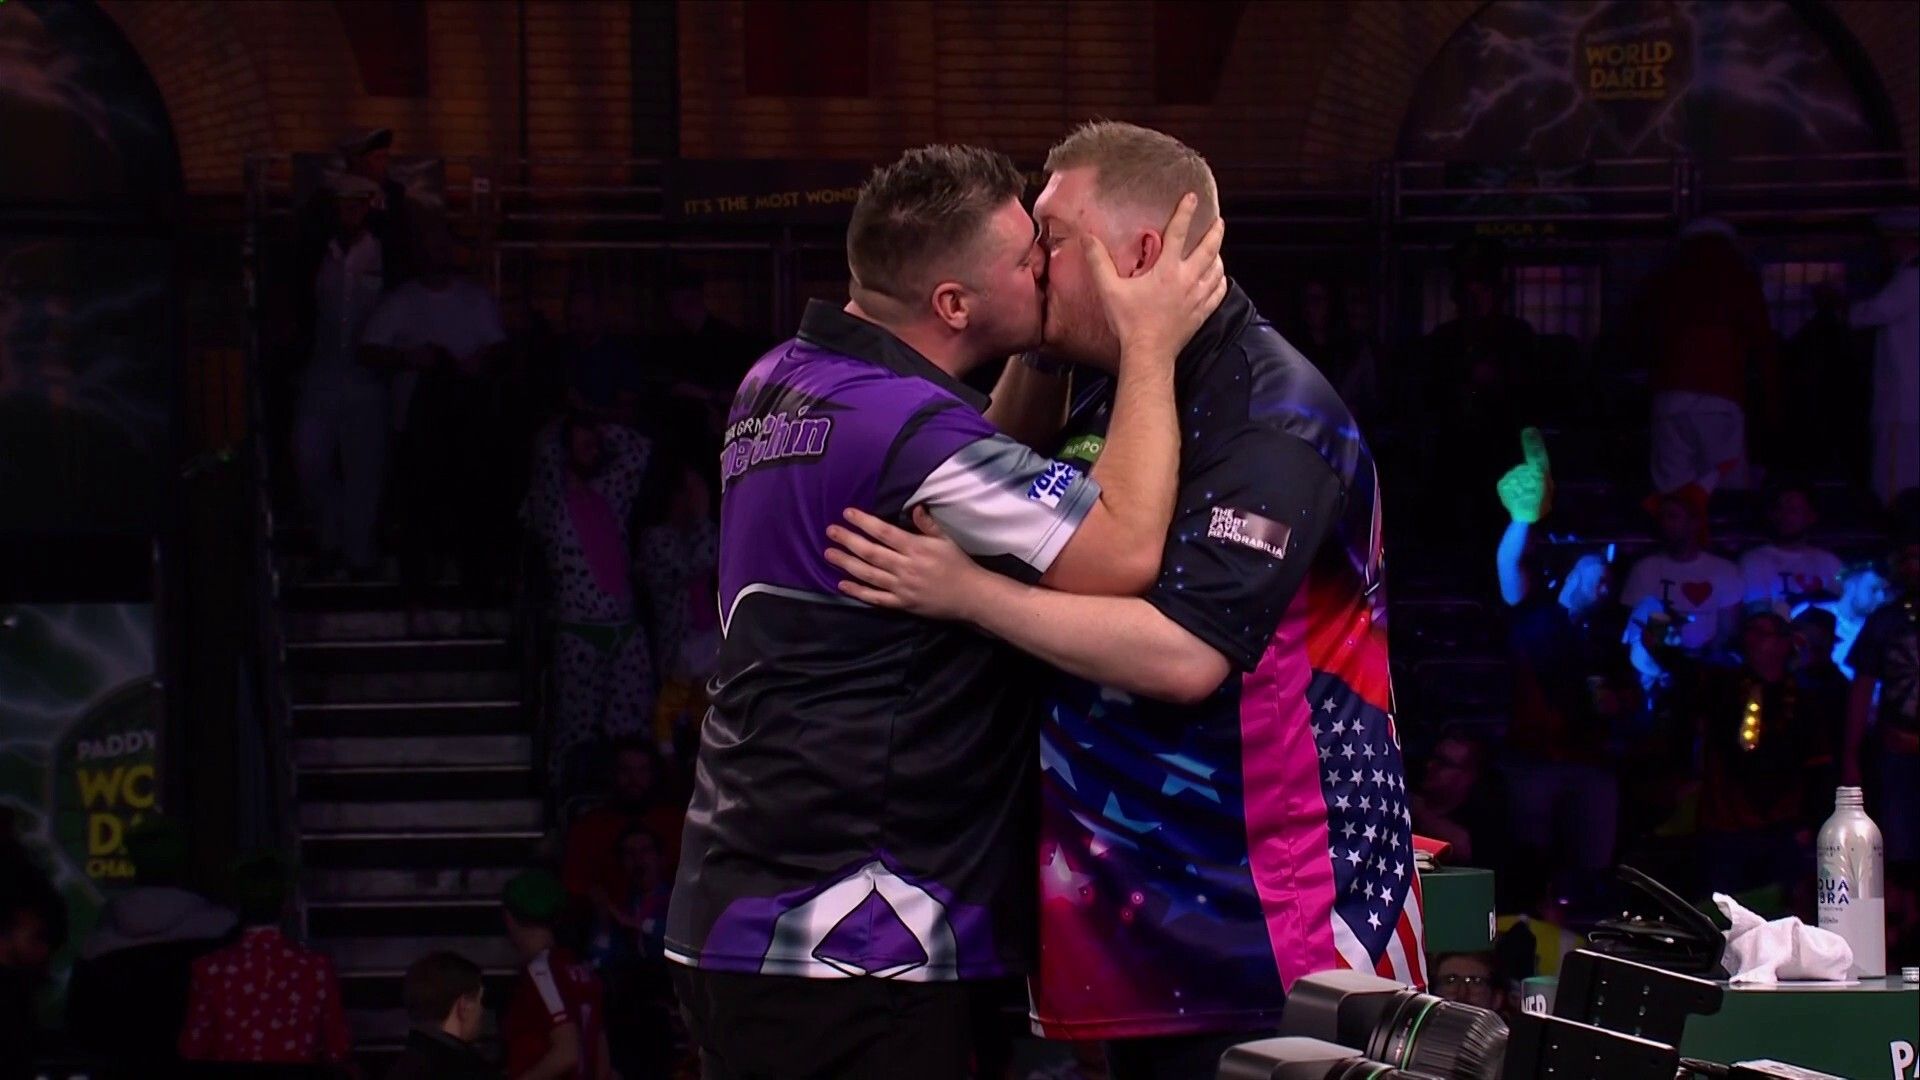 Gurney plants kiss on Evans after thriller at Ally Pally